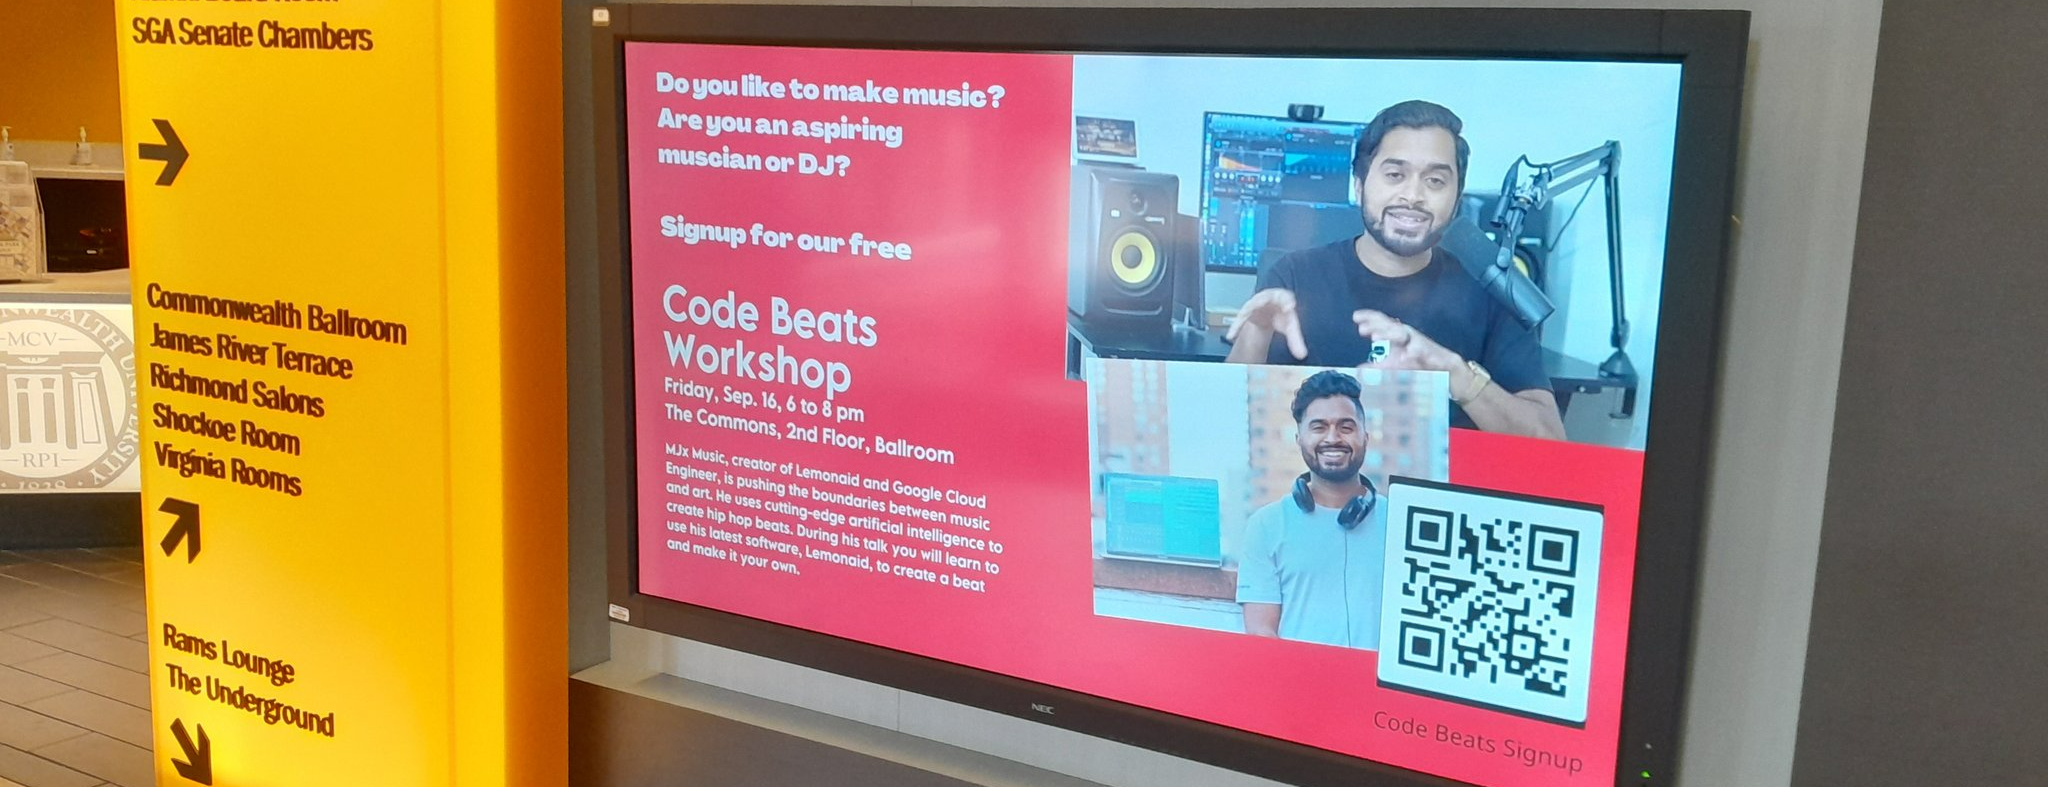 A poster on a TV screen presenting the next code beats workshop.